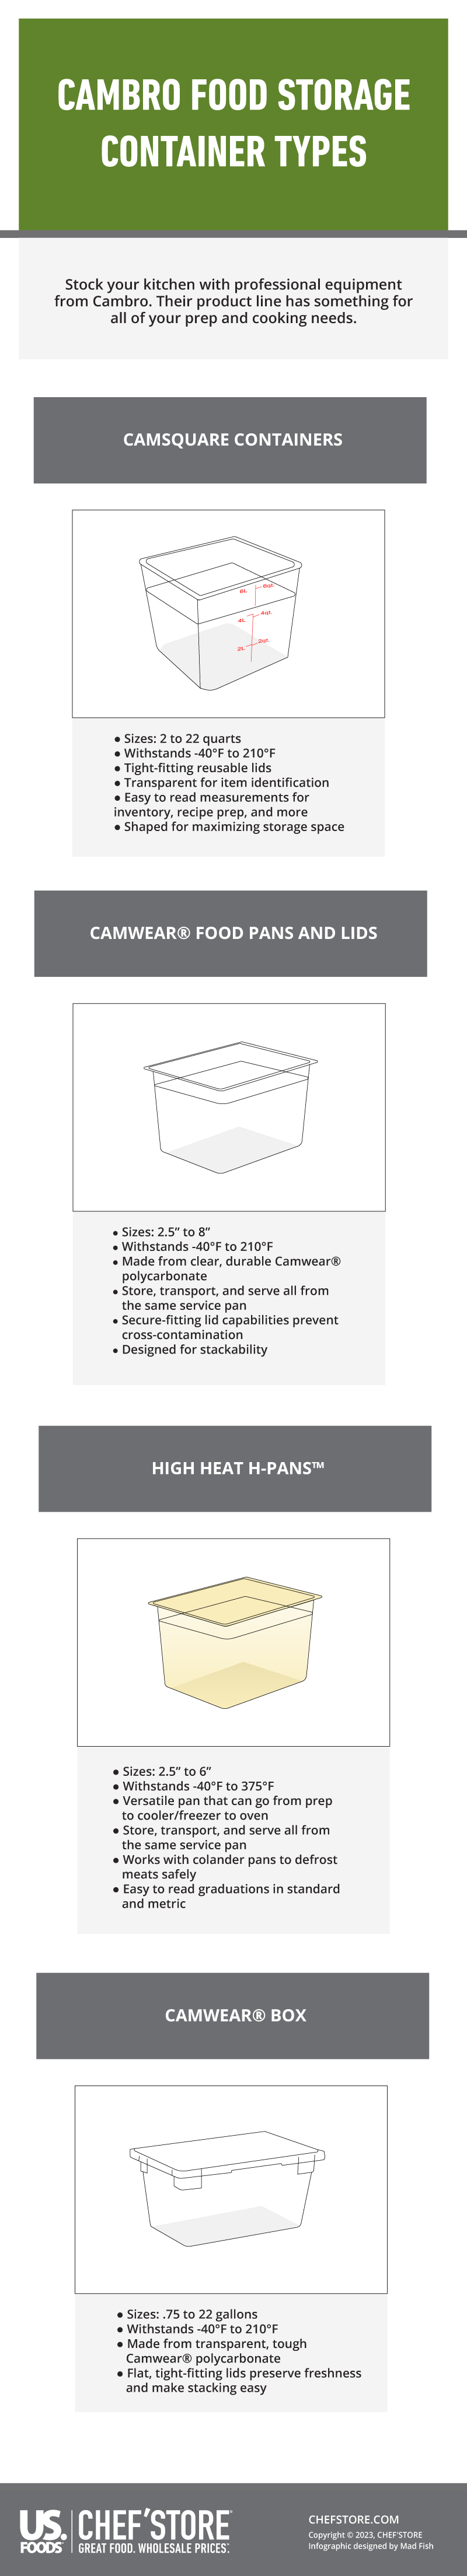 Cambro food storage container types.